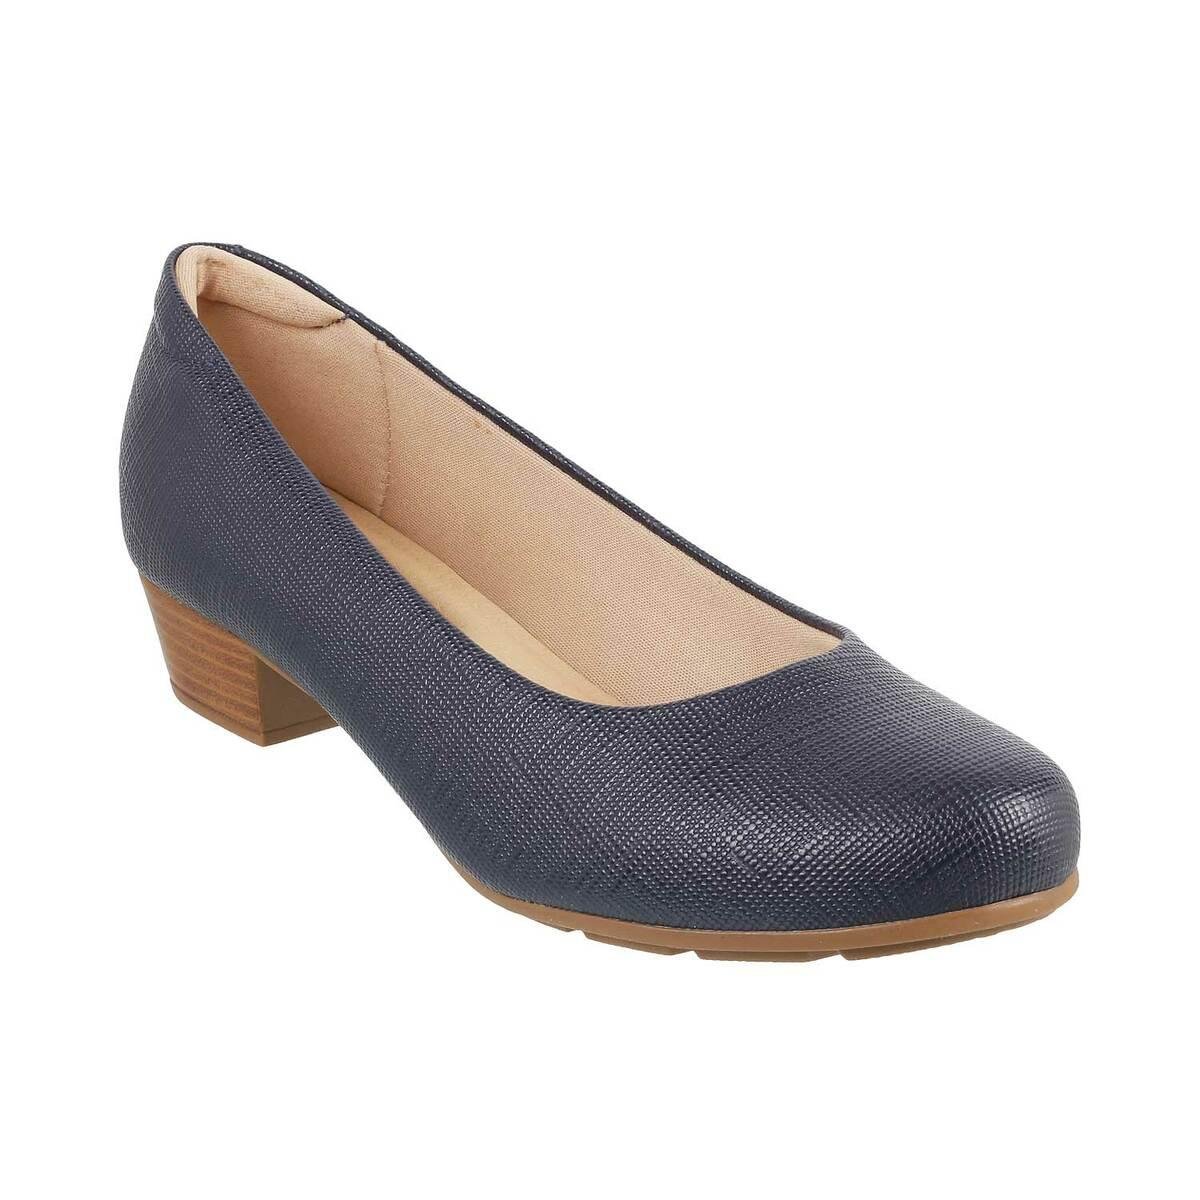 Fashimo Women Formal Heel Shoes And Bellies